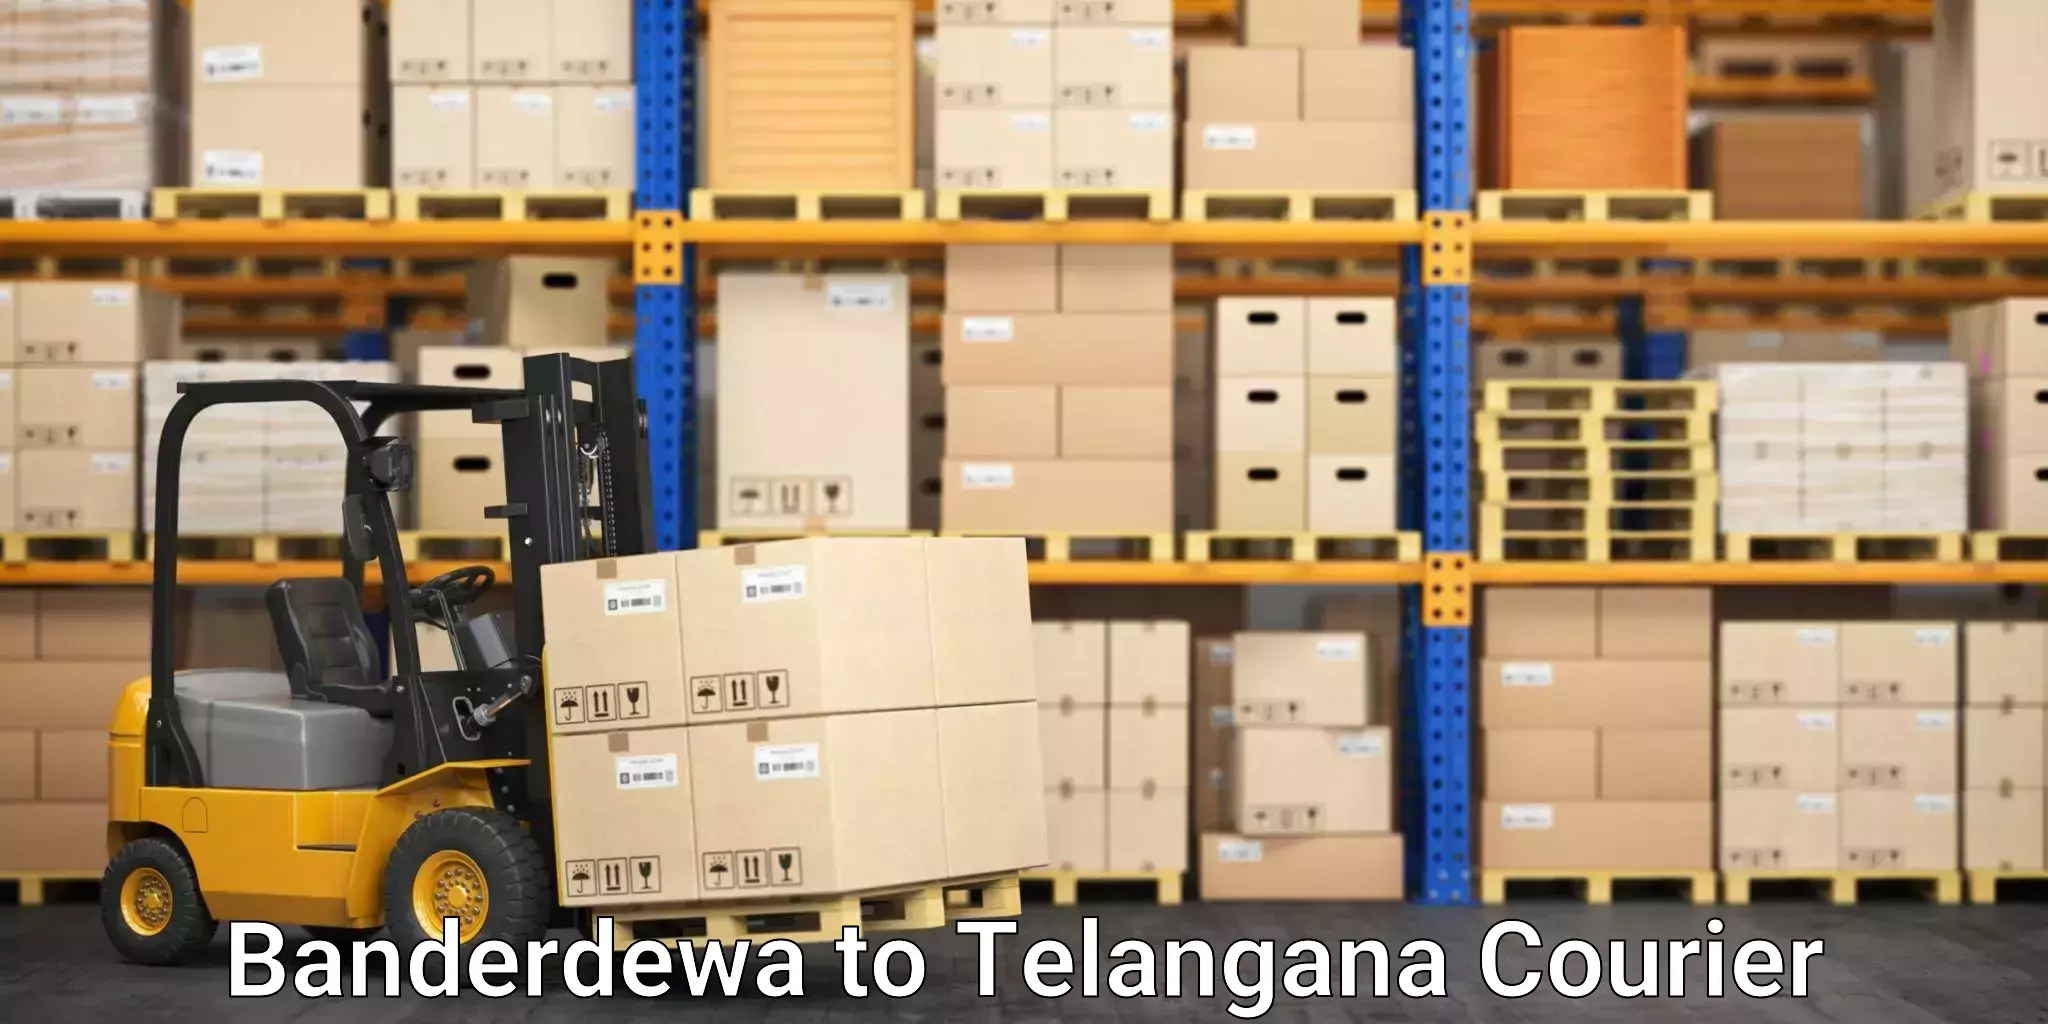 Expedited shipping solutions in Banderdewa to Sadashivpet